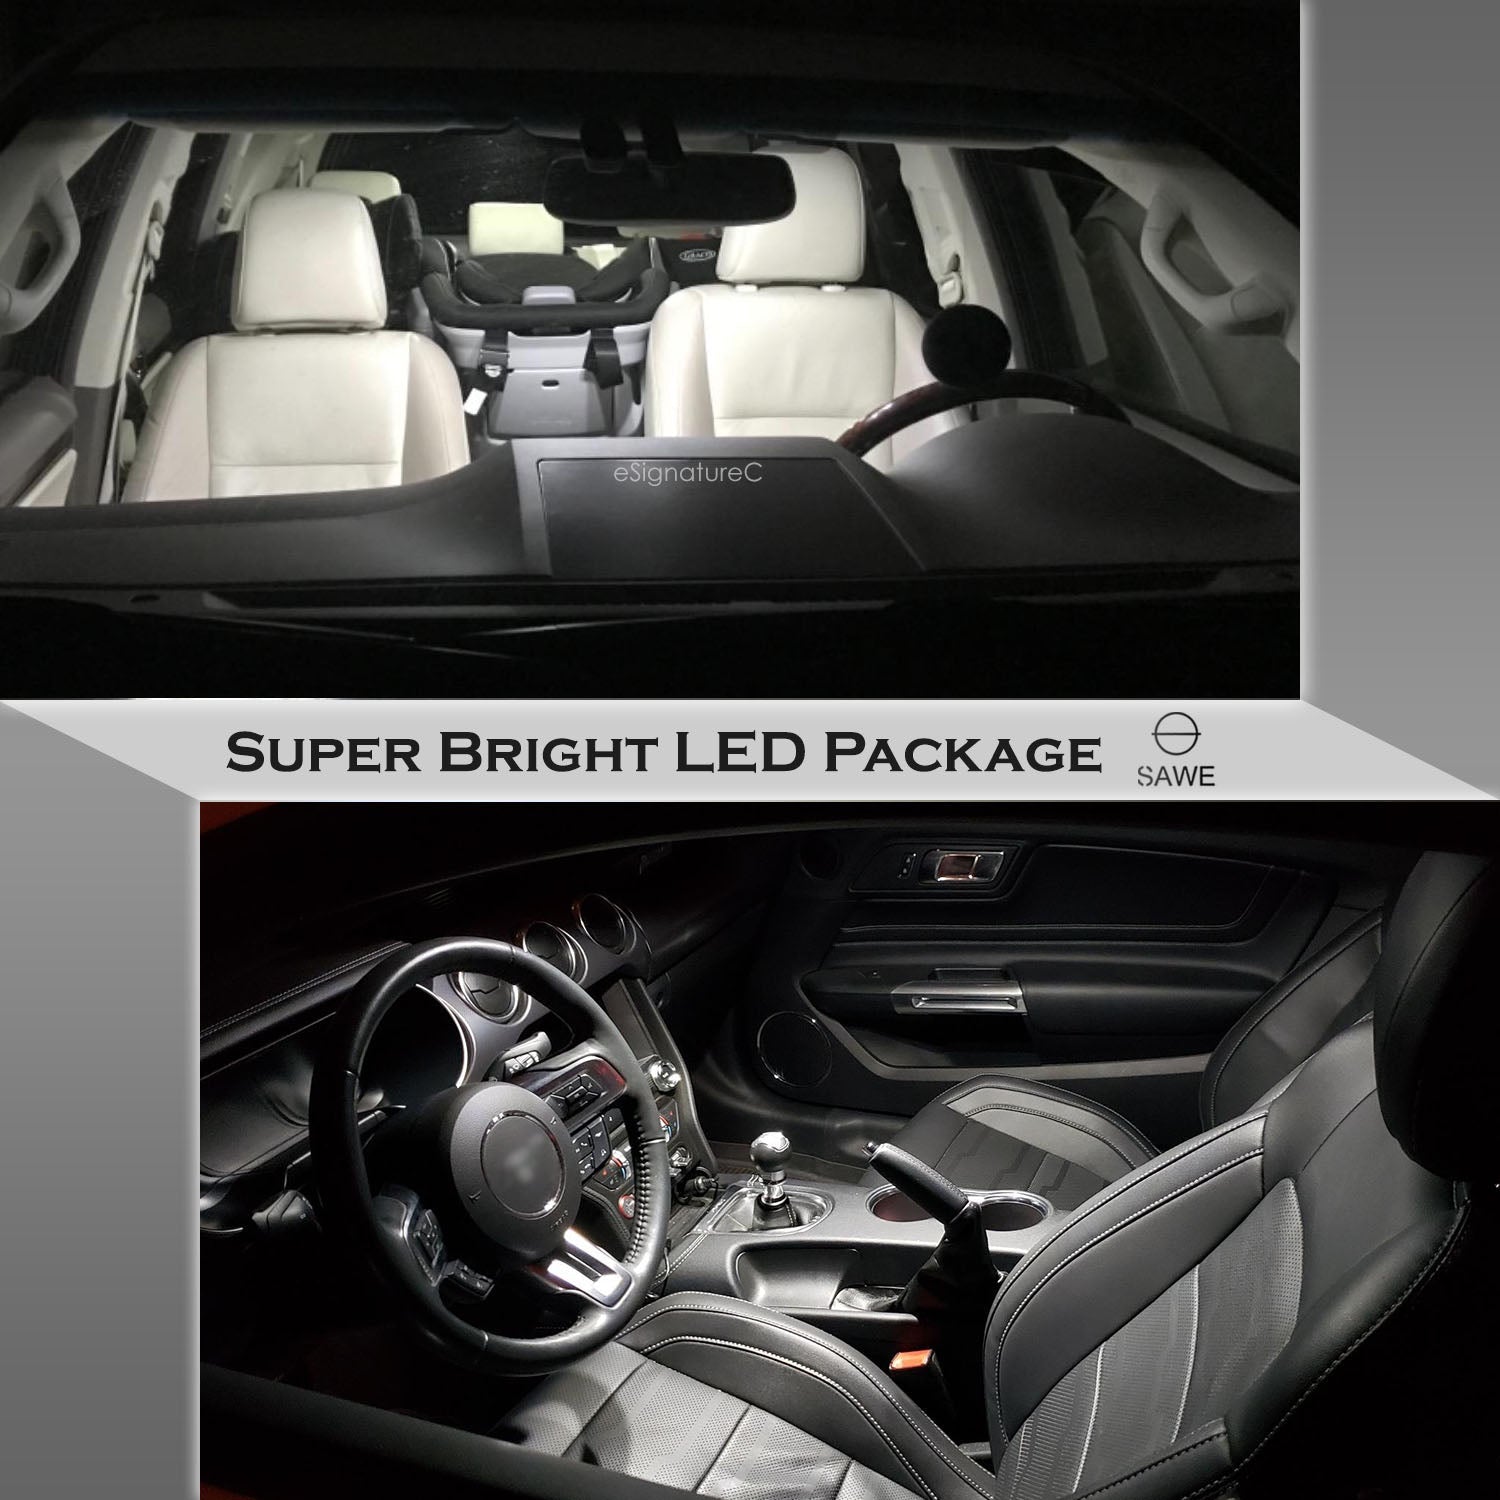 For Subaru Outback Interior LED Lights - Dome & Map Light Bulbs Package Kit for 2000 - 2014 - White